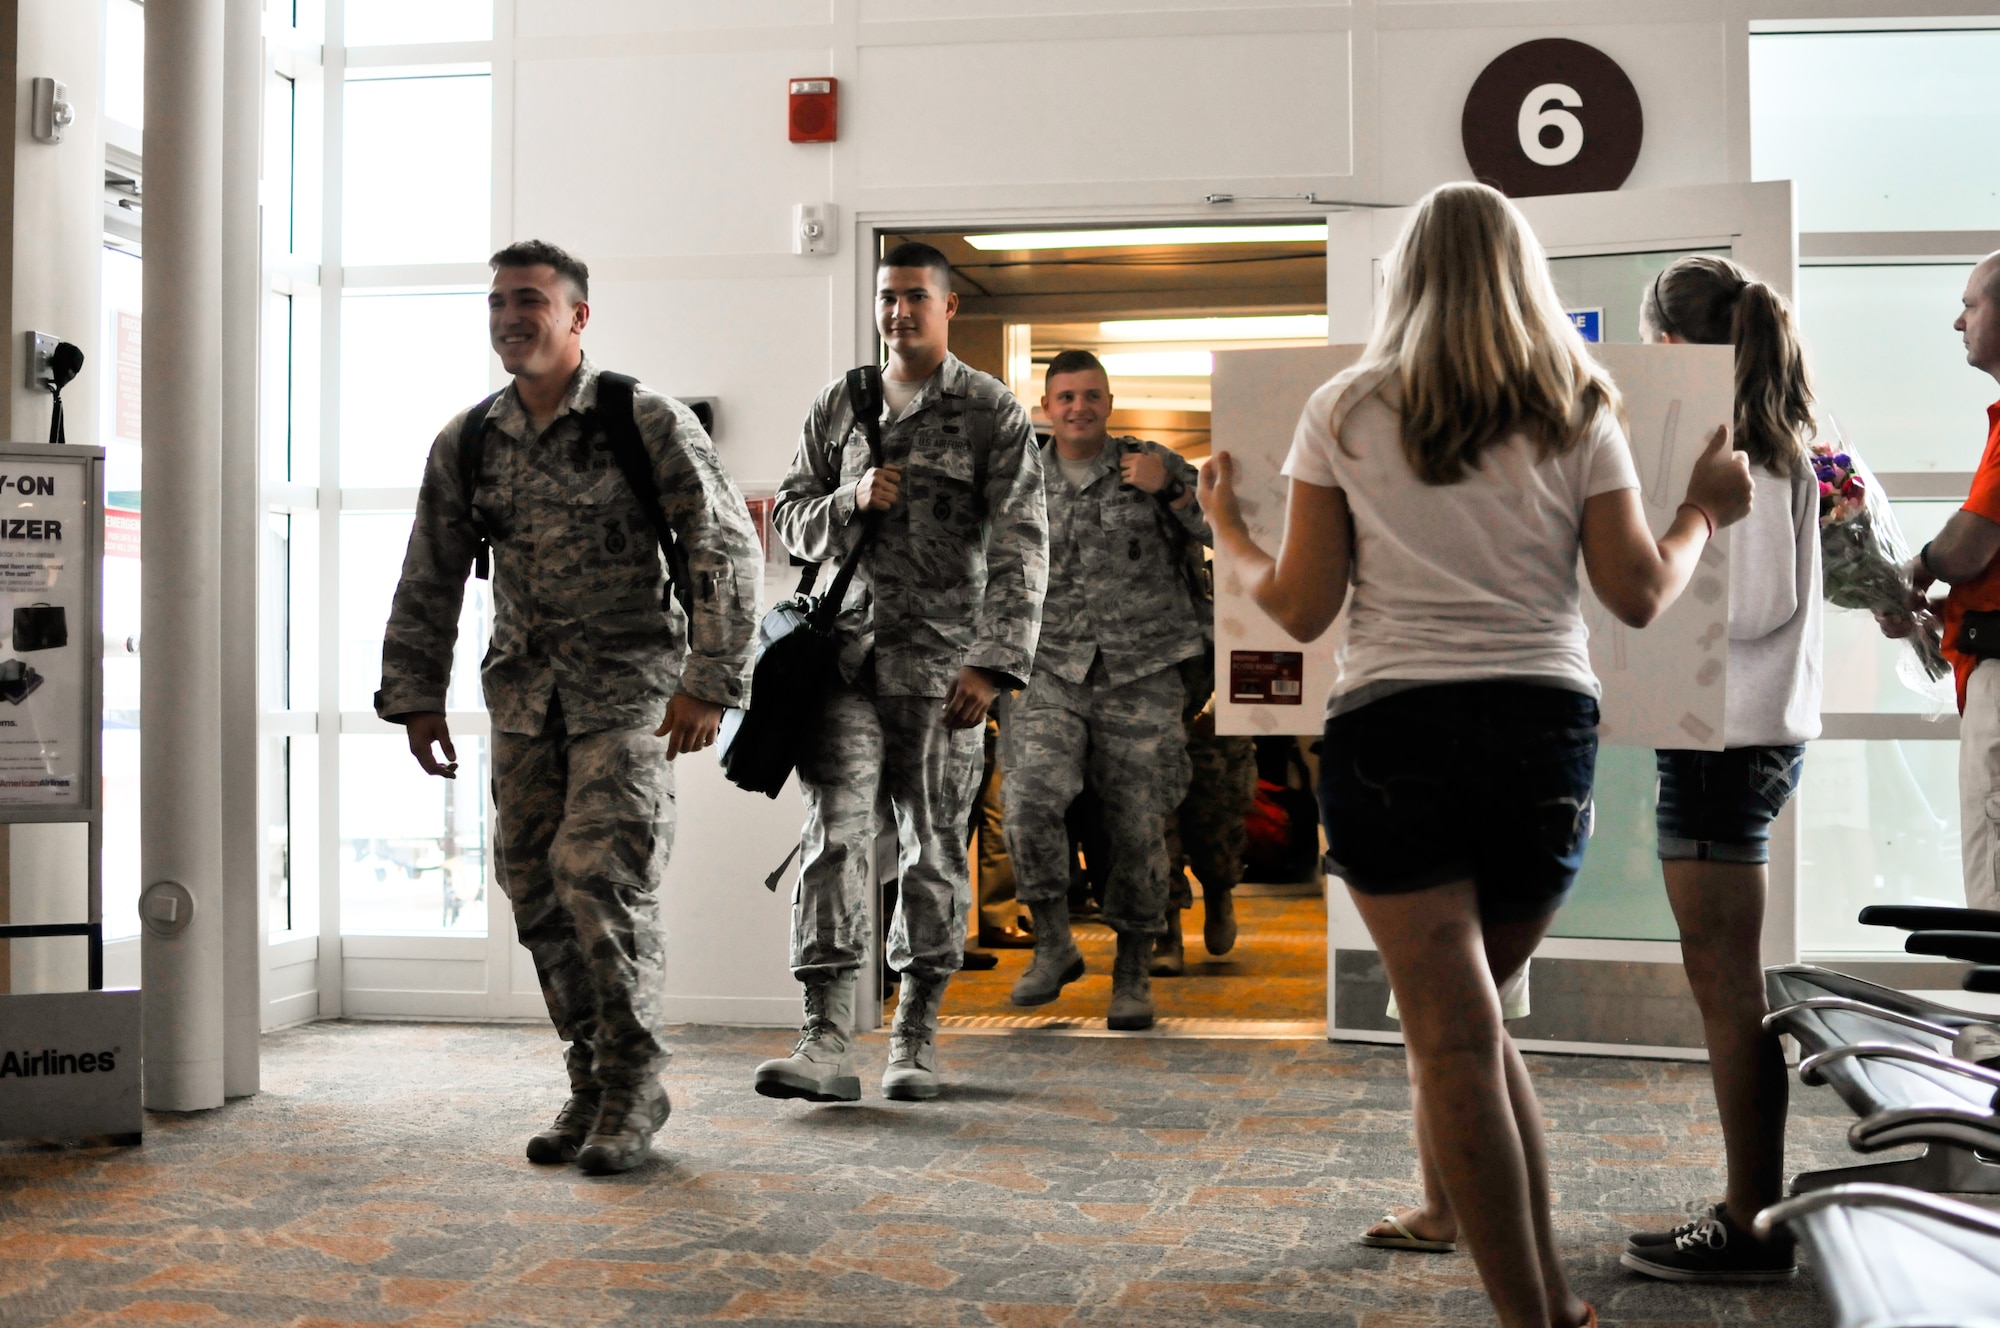 From left, U.S. Air Force Airman 1st Class Tyler N. Woolridge, Senior Airman Christian A. Downen and Airman 1st Class Jordan A.D. Sanford, specialists with the 182nd Security Forces Squadron, arrive home at the General Wayne A. Downing Peoria International Airport in Peoria, Ill., Aug. 6, 2014. They and 15 Illinois Air National Guardsmen deployed to Southwest Asia for seven months in support of Operation Enduring Freedom. They were assigned to the 405th Expeditionary Security Forces Squadron overseas, where they were responsible for law enforcement and security missions in the region’s global war on terror. (U.S. Air National Guard photo by Staff Sgt. Lealan Buehrer/Released)